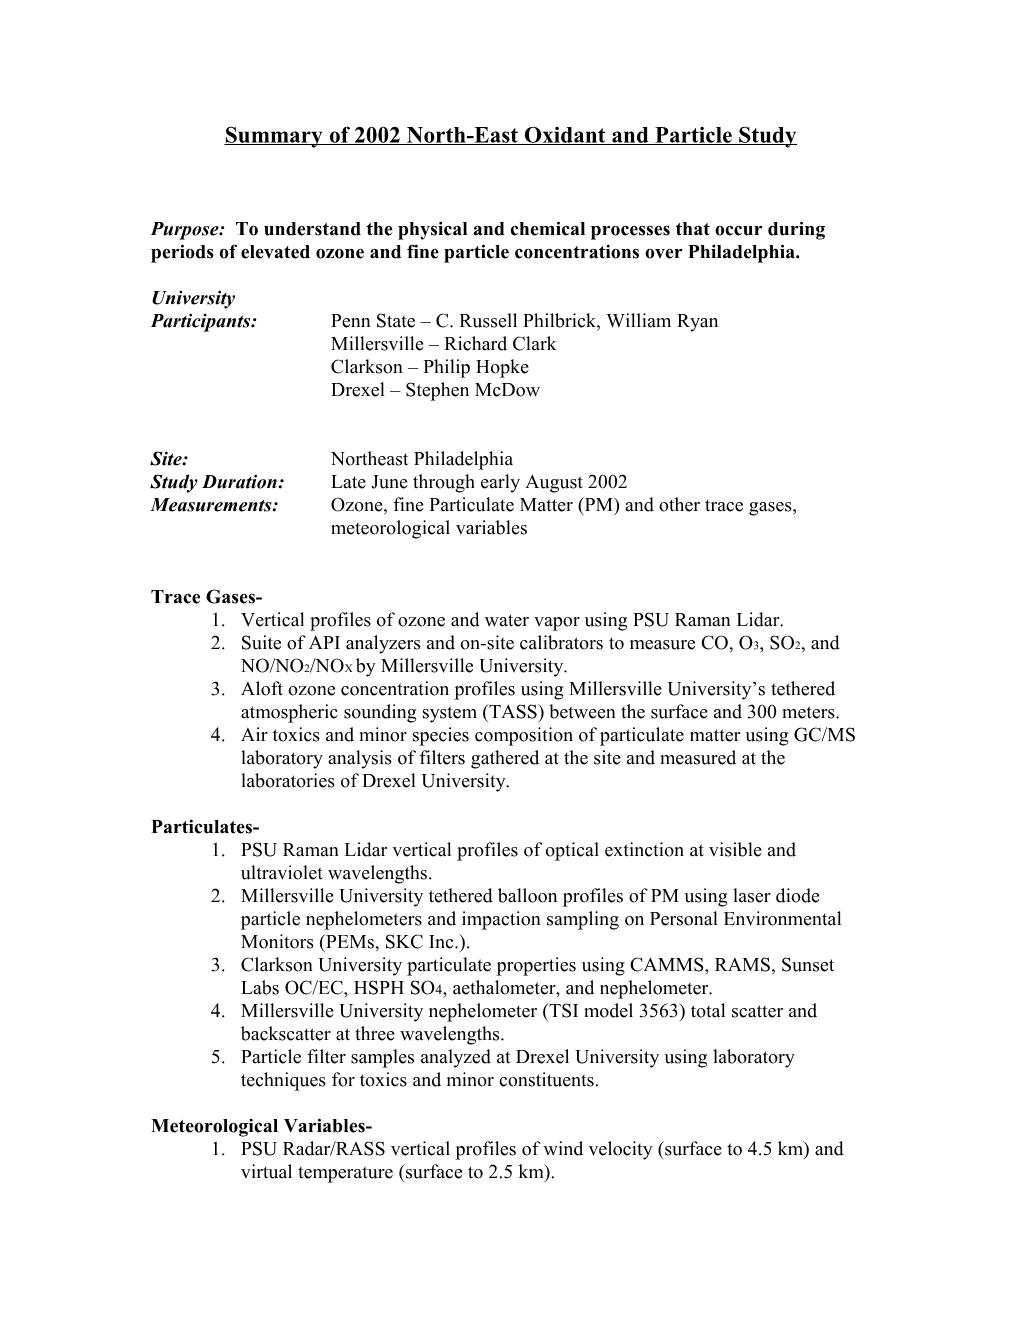 Summary of 2002 Northeast Oxidant and Particle Study